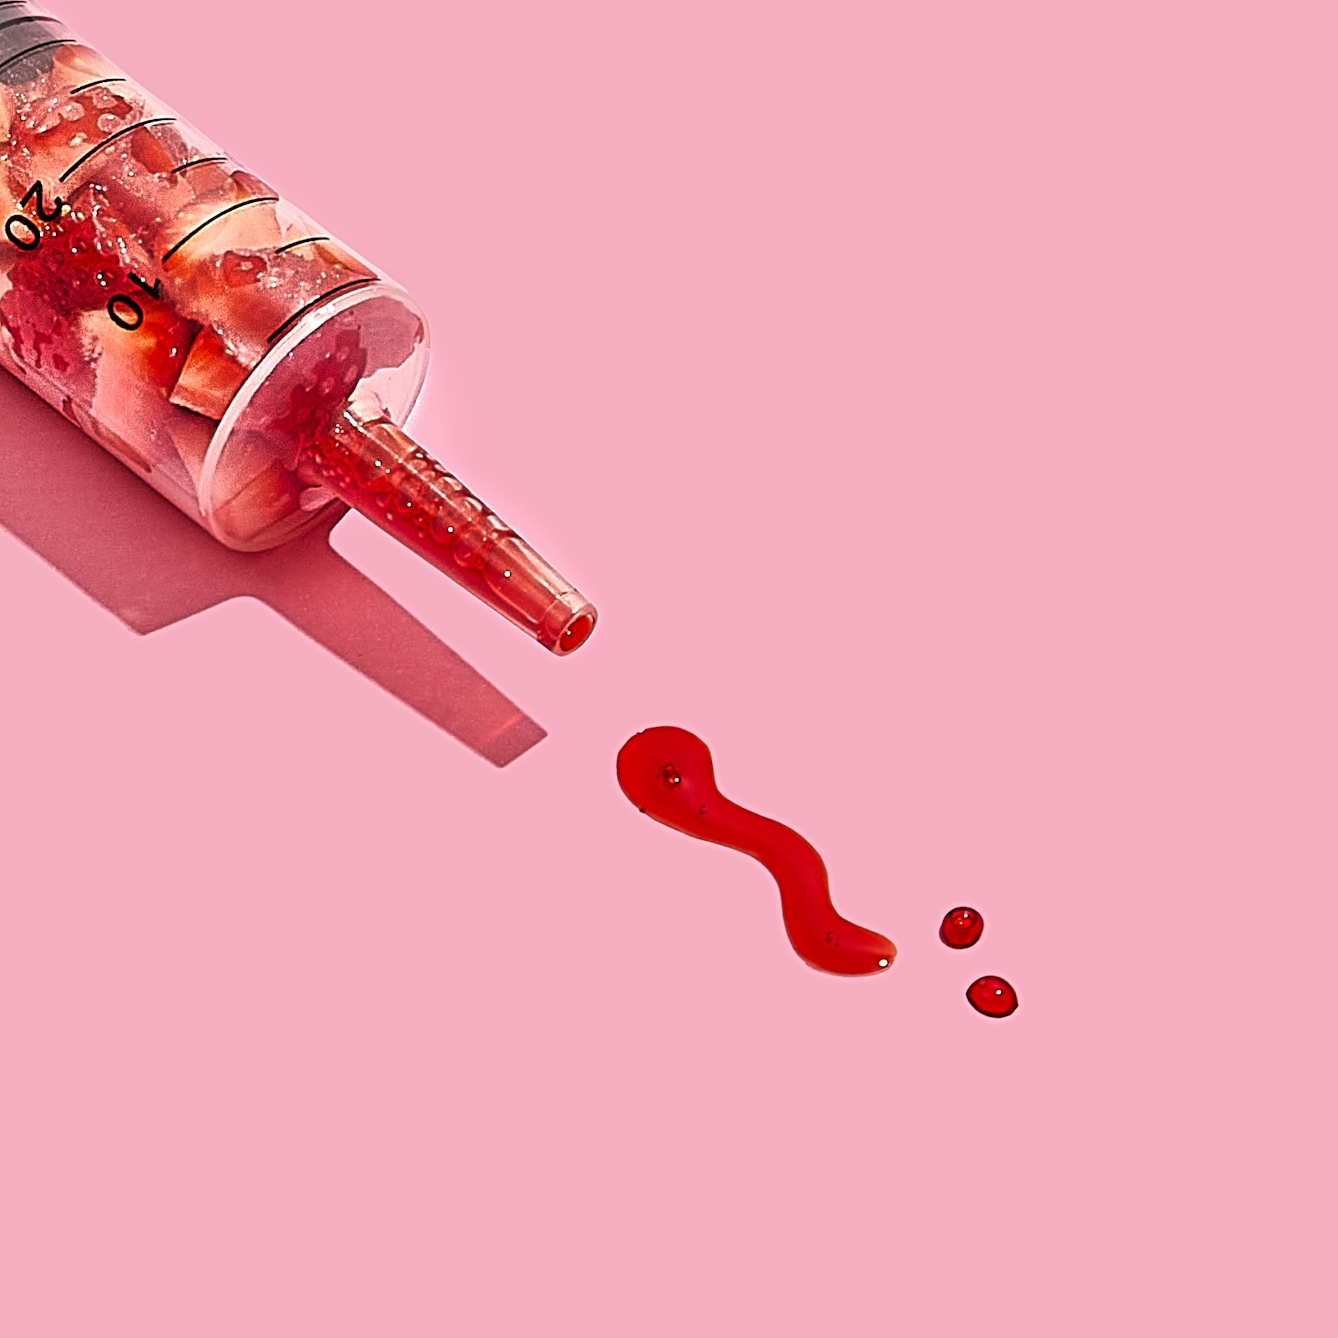 Photograph of a medical syringe lying on its side on a bright pink background. The syringe is full of chunks of cut up strawberry, compressed down into the lower half of the granulated tube. The nozzle of the syringe contains bright red strawberry juice. Some of this juice has been pushed out of the syringe and formed two dots and a squiggle on the background, reminiscent of marks made with a pen on paper.